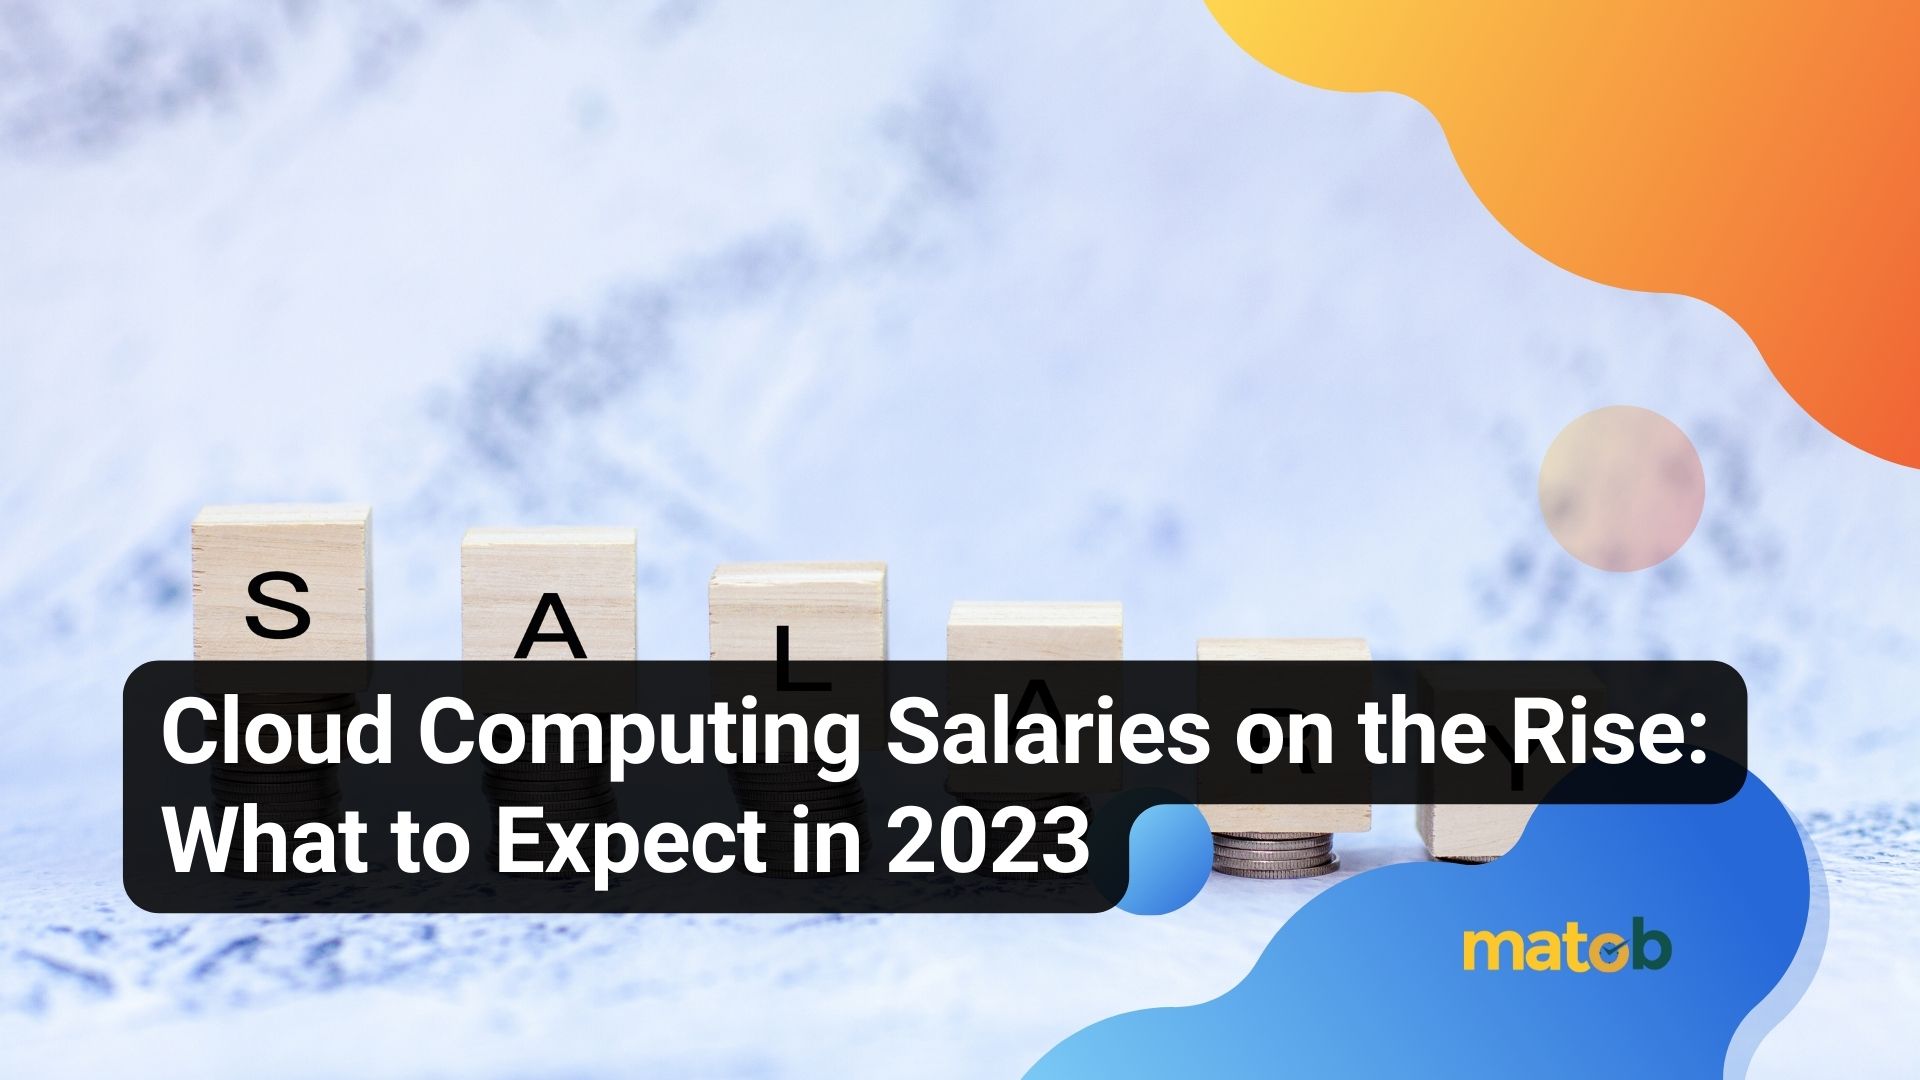 Cloud Computing Salaries on the Rise: What to Expect in 2023